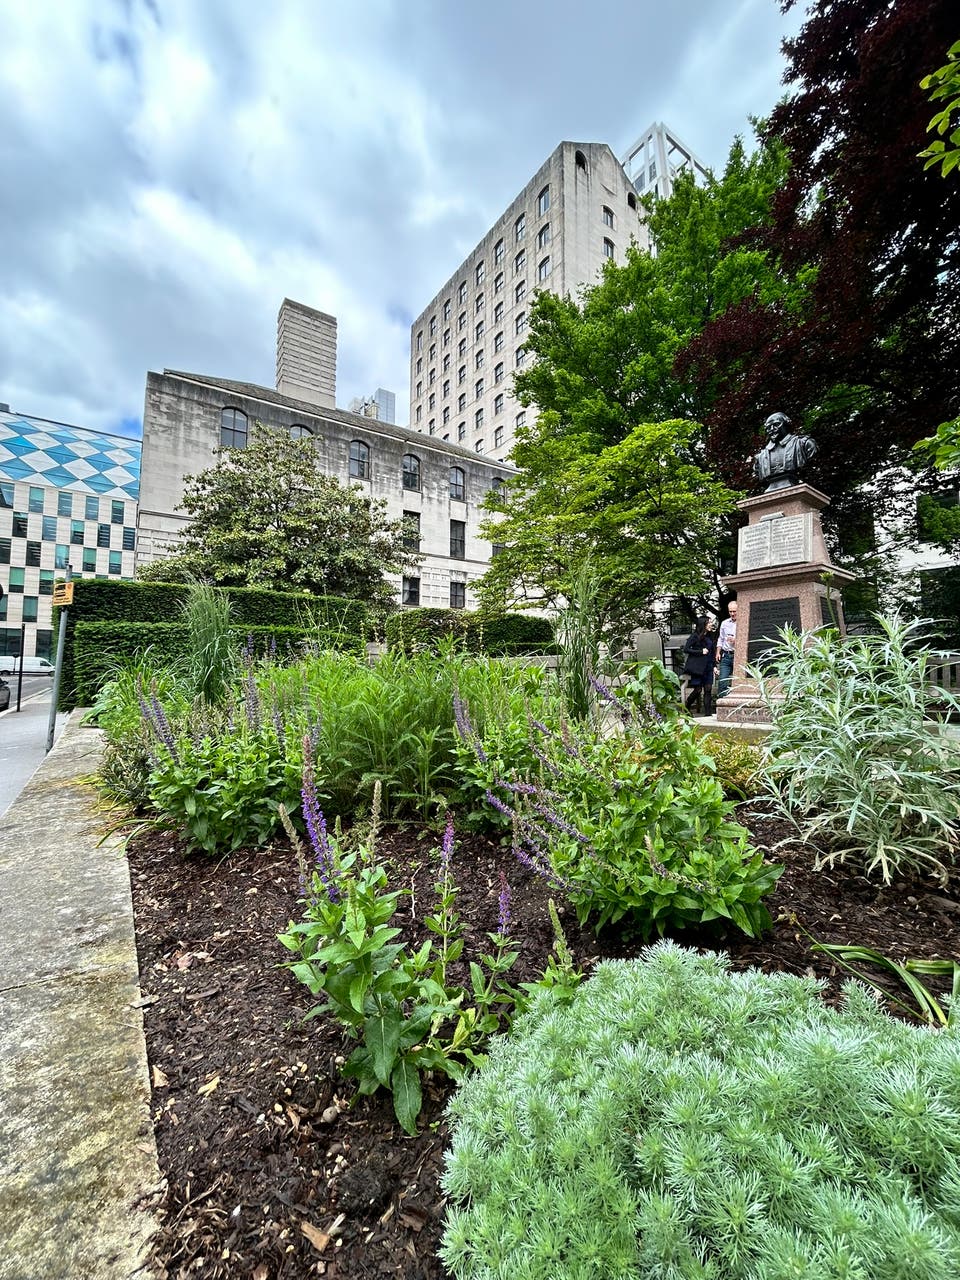 Celebrate London Open Gardens with sustainable gardening tips